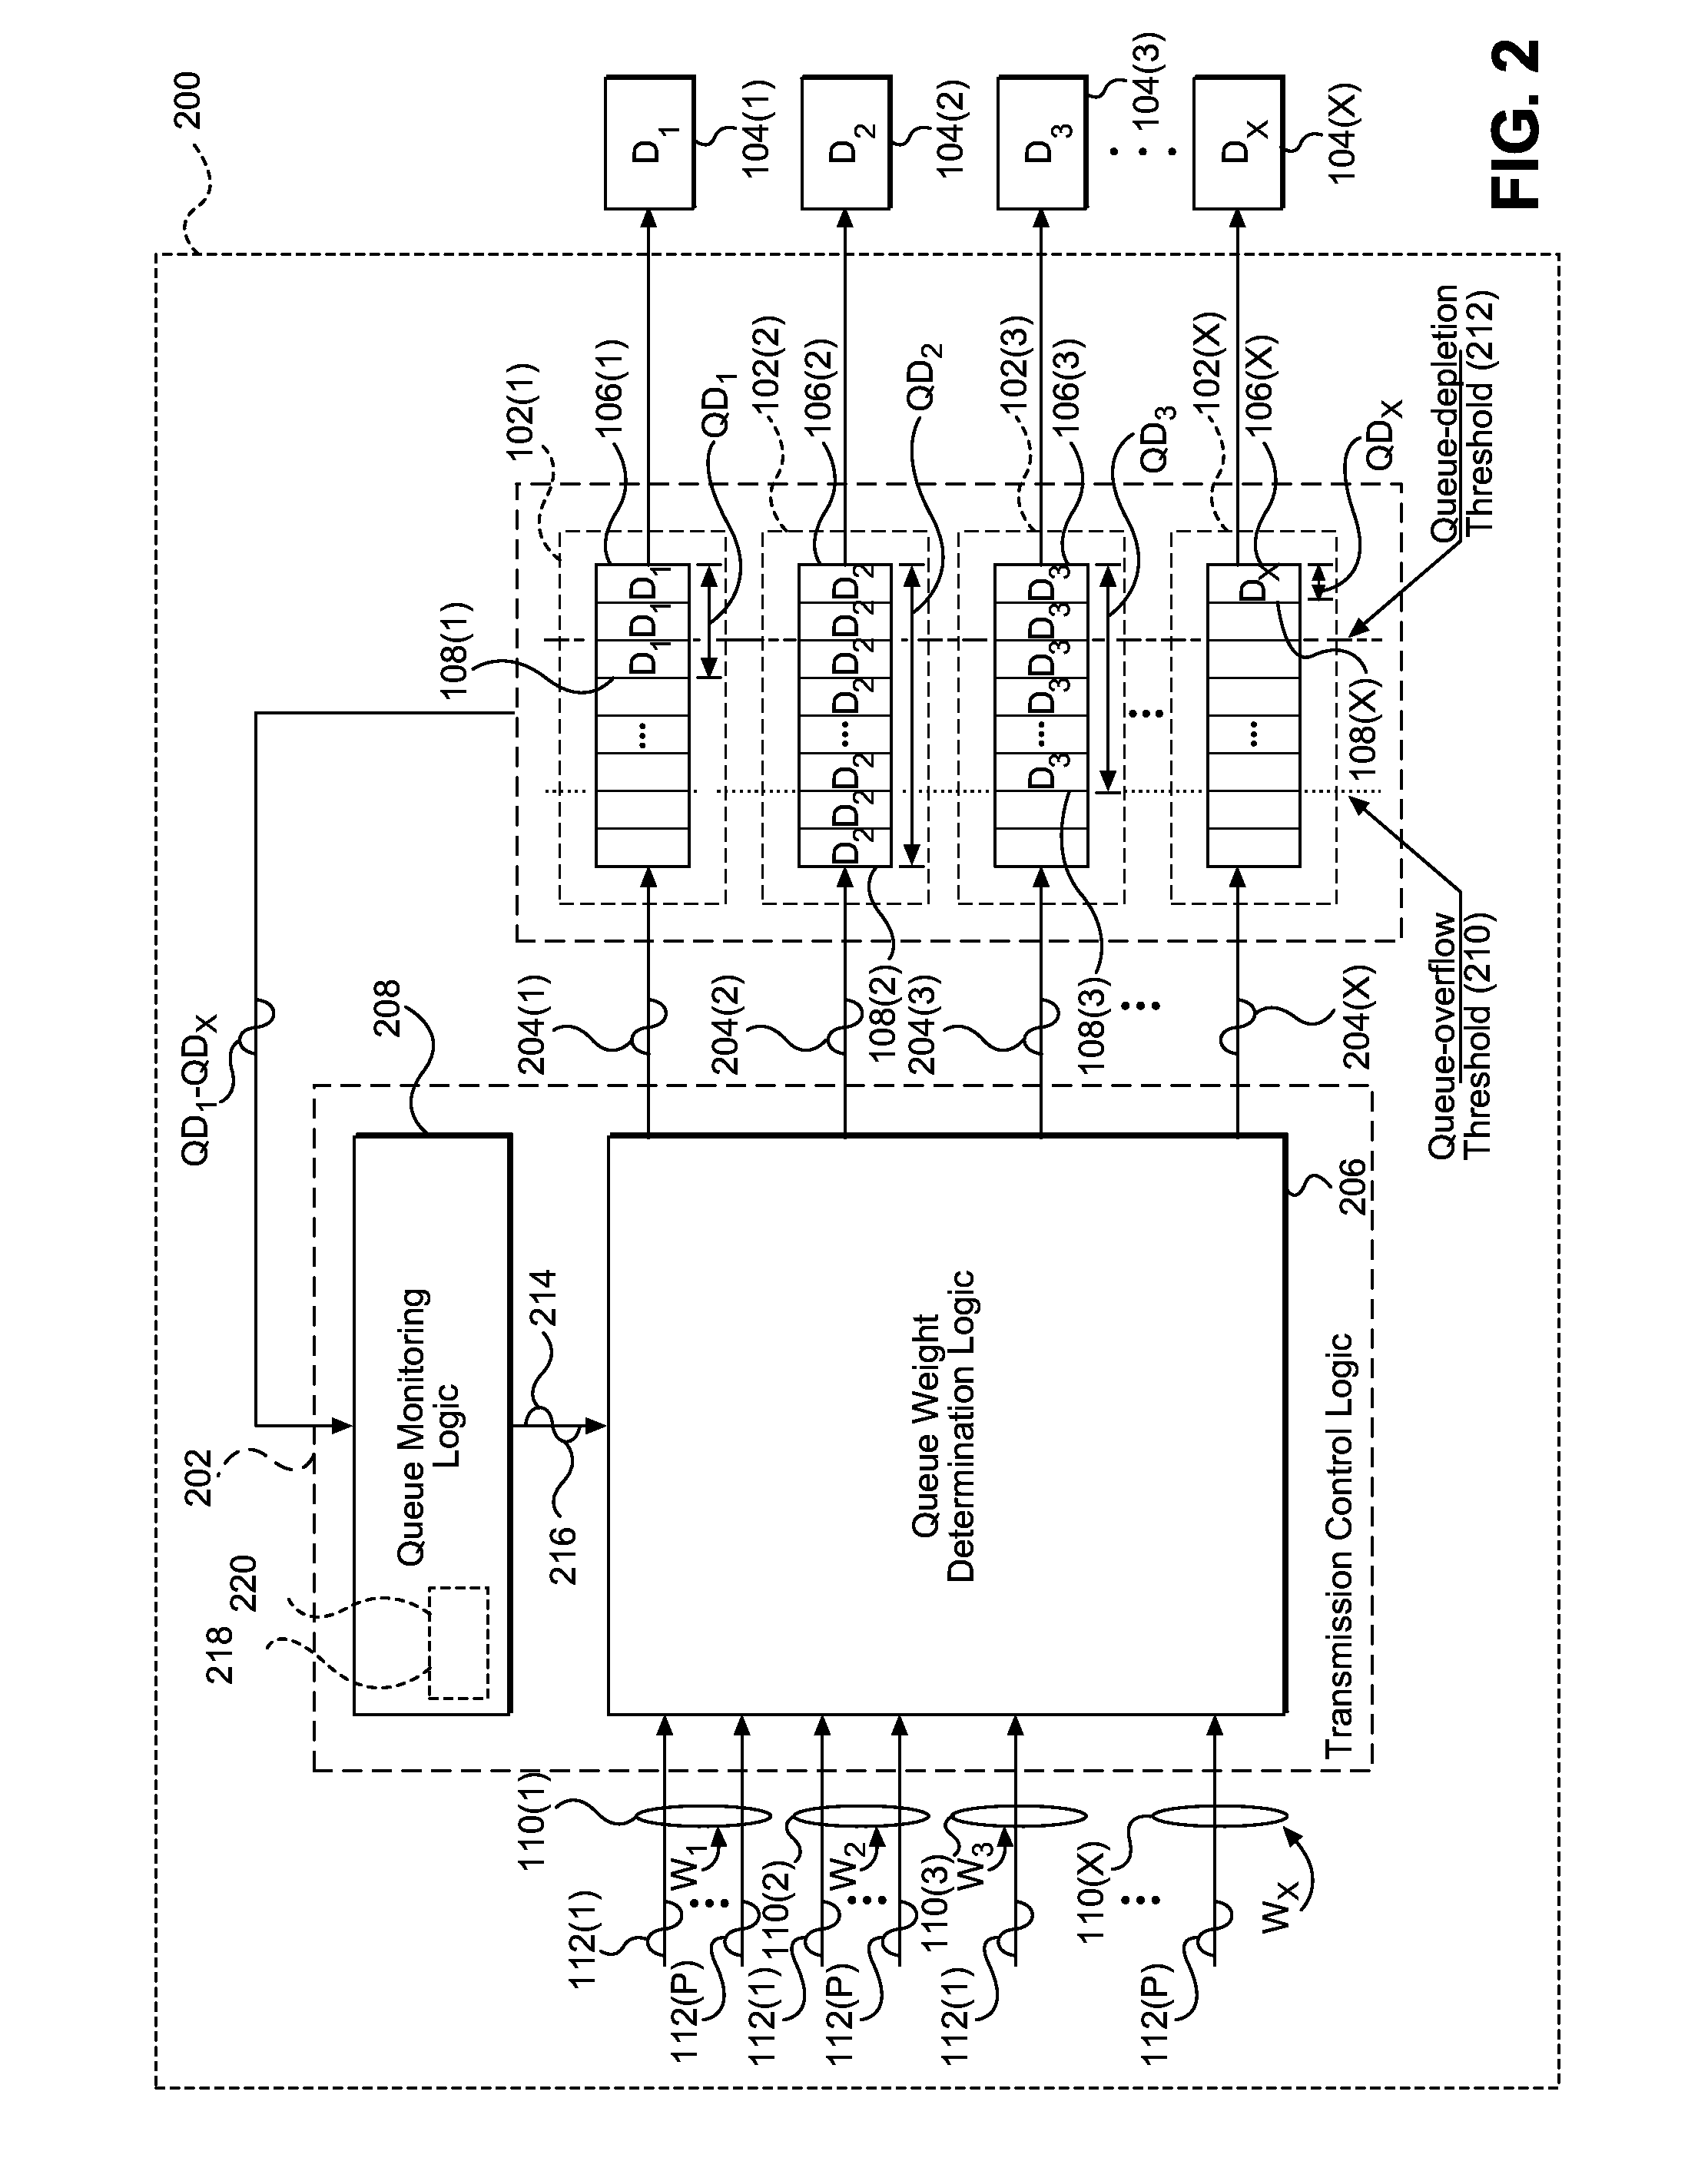 Head-of-line blocking (HOLB) mitigation in communication devices